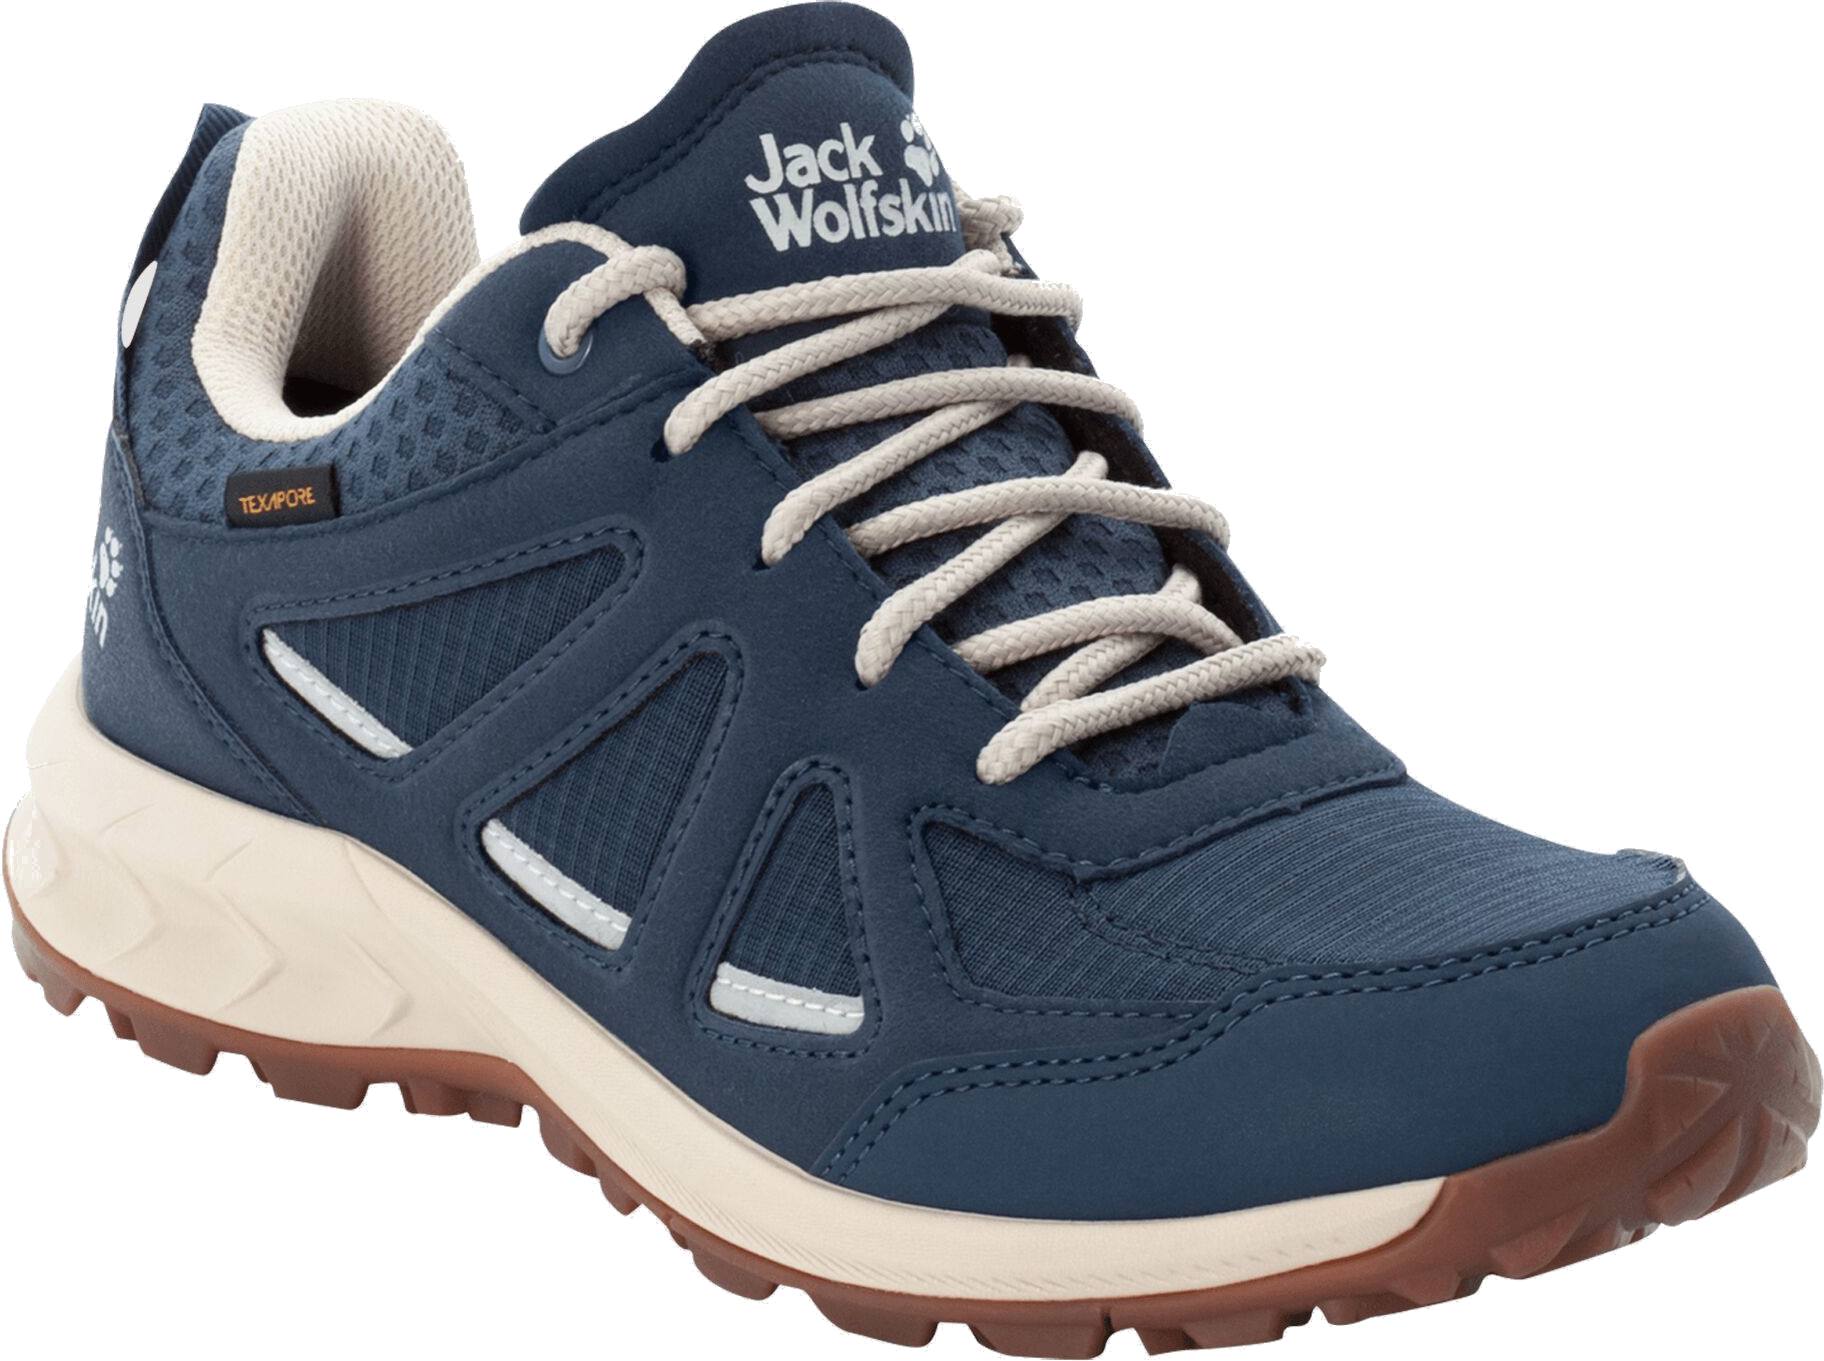 Women's hiking shoes Jack Wolfskin Woodland 2 Vent Low - Womens Shoes